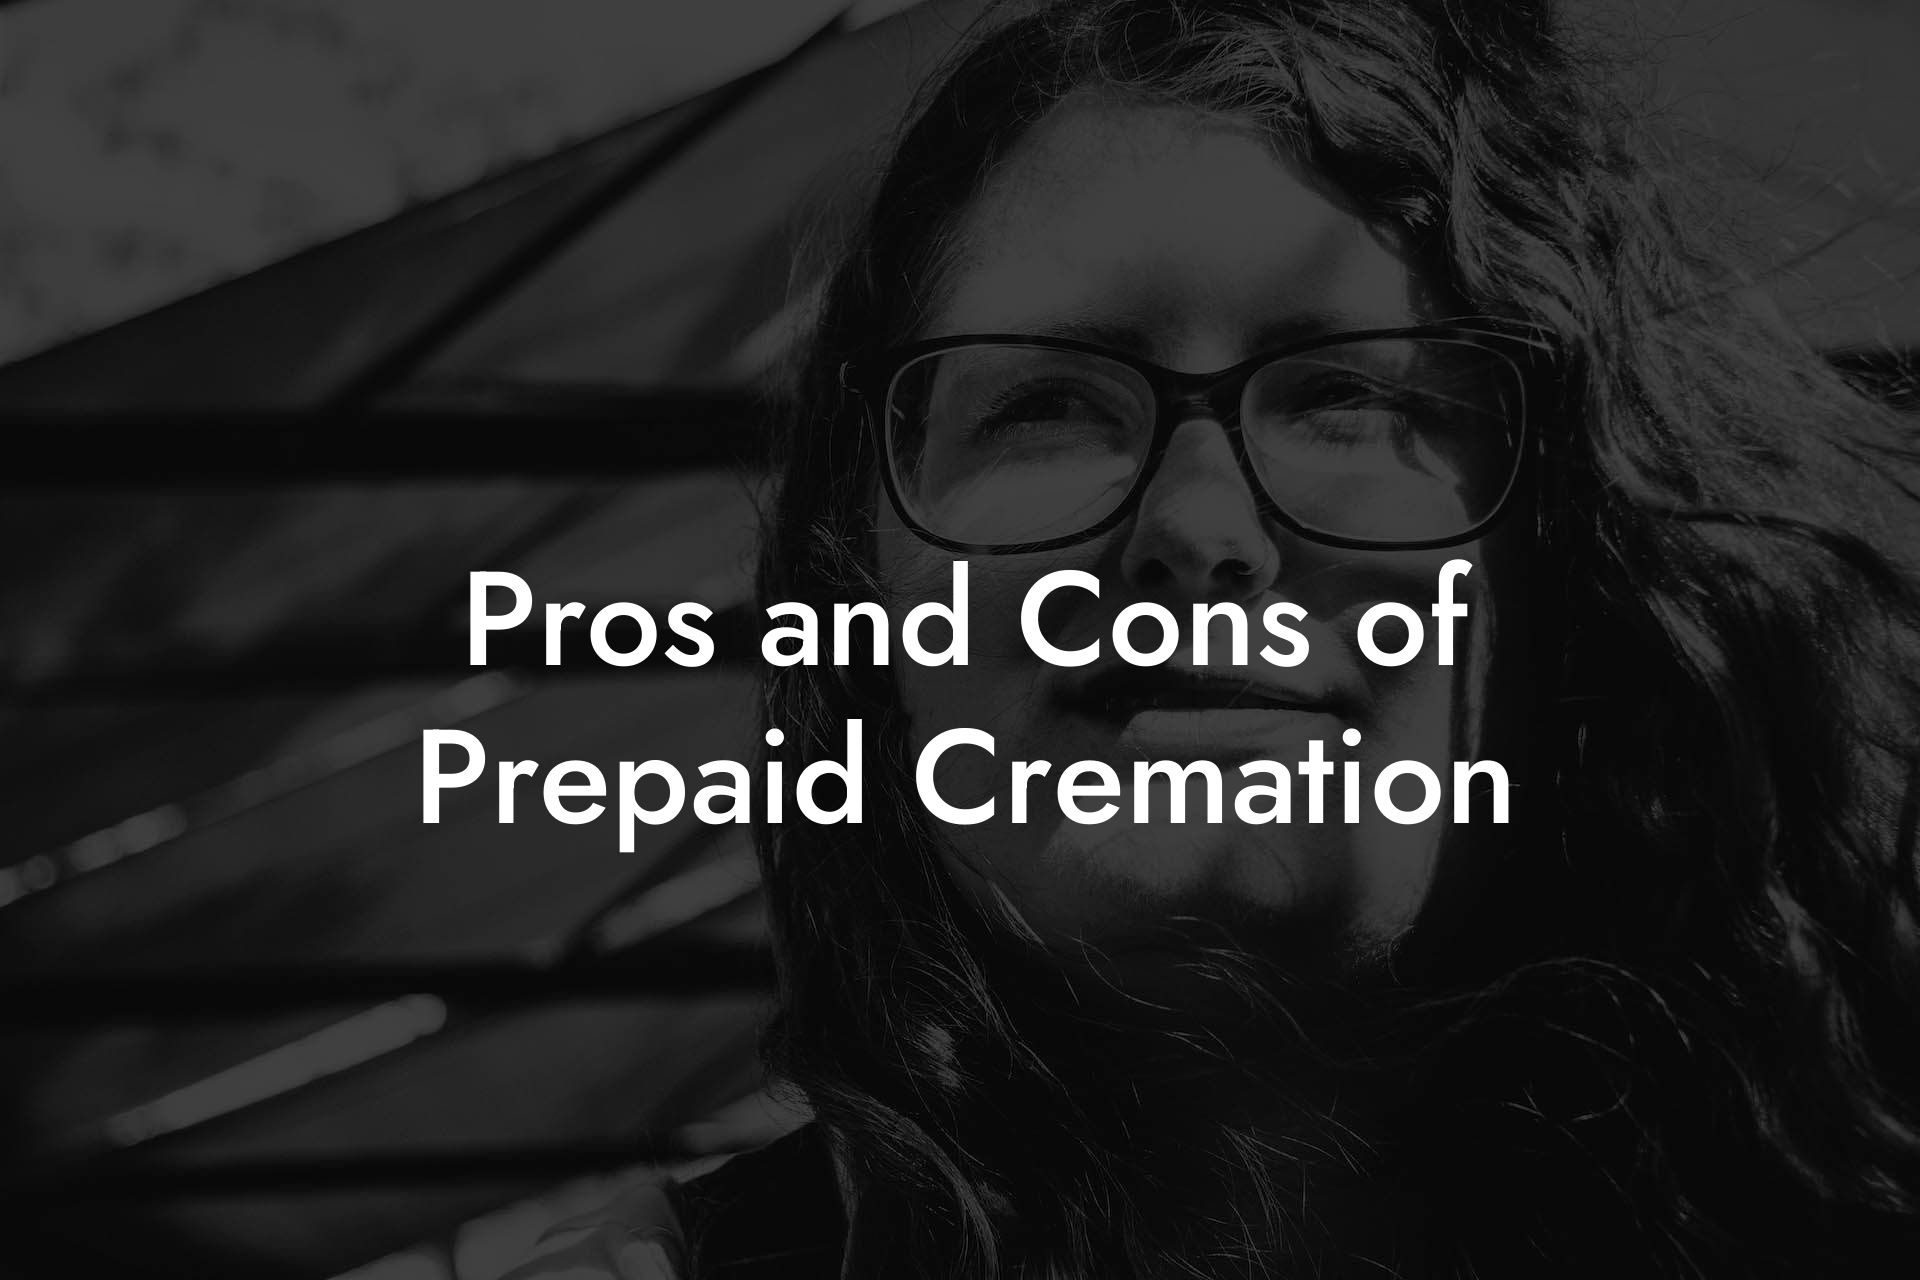 Pros and Cons of Prepaid Cremation